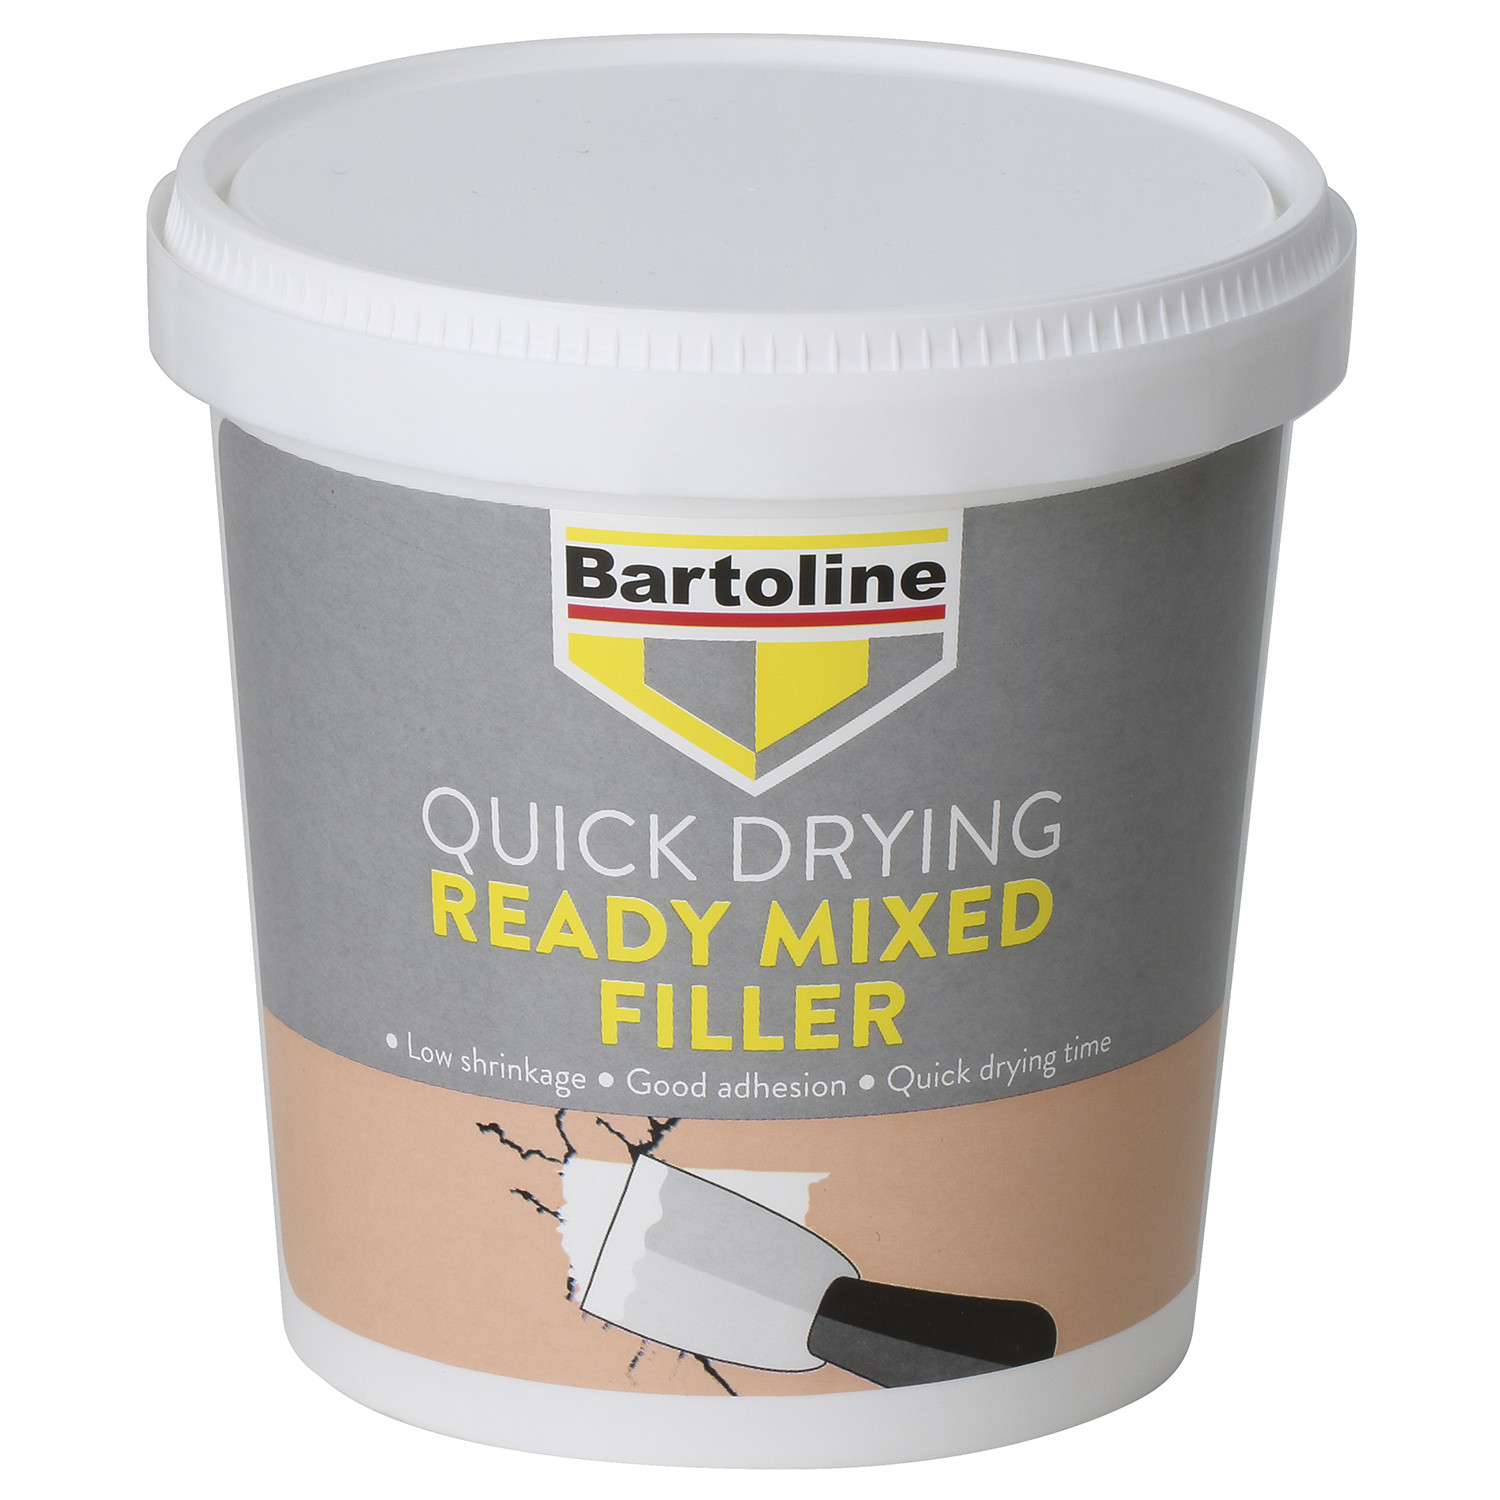 Bartoline Quick Drying All Purpose Ready Mixed Filler Image